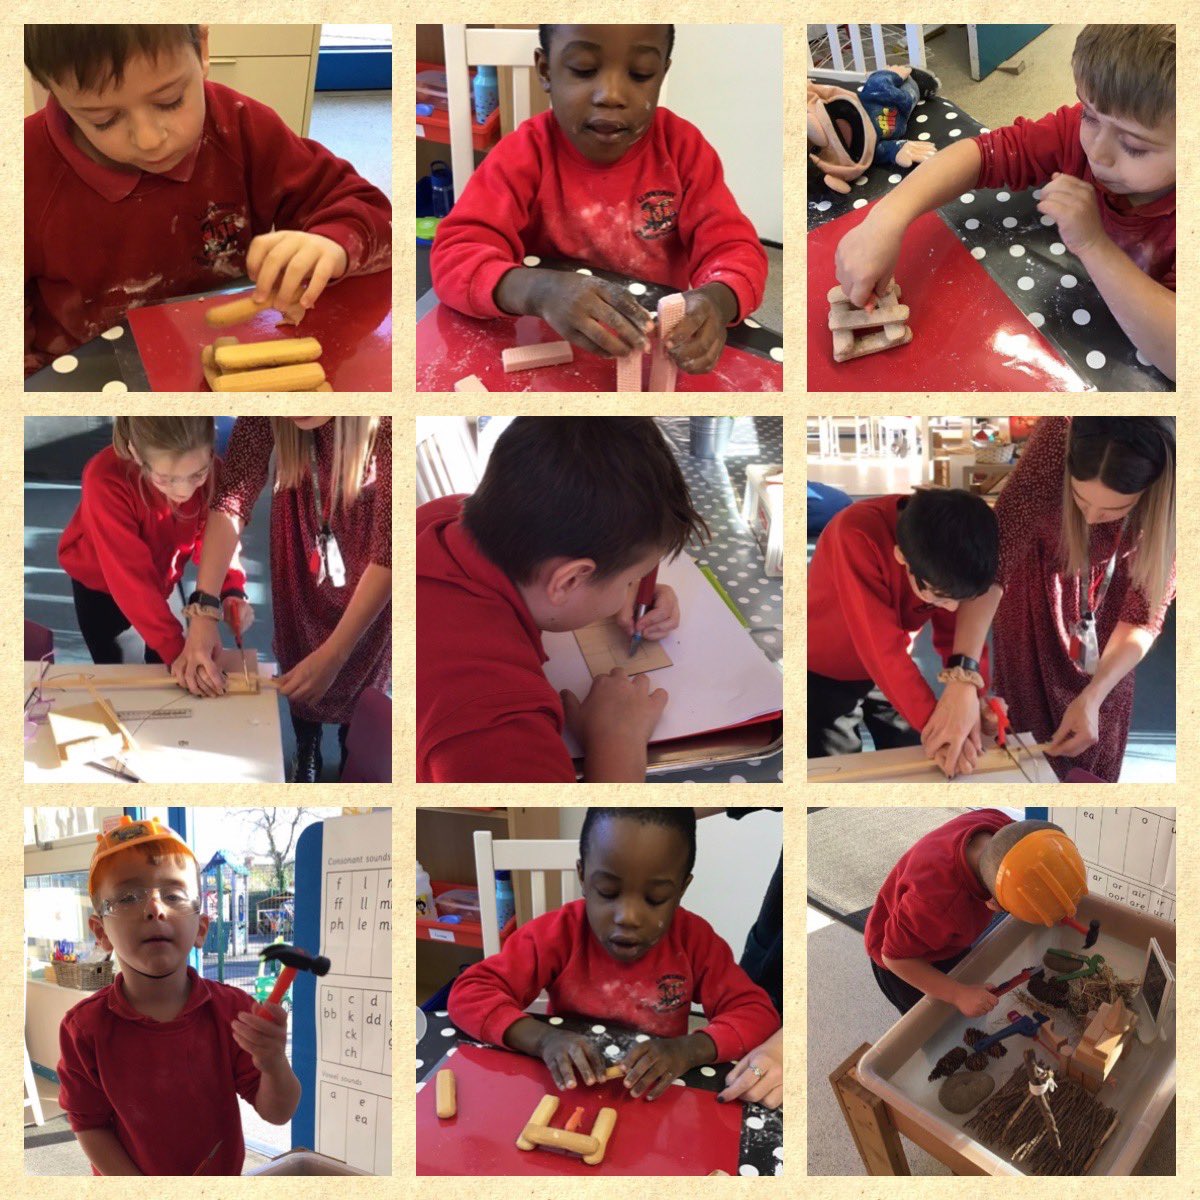 #ClassLC busy building today. Saws, scissors and craft knives ready as they chose wood & fabric, and even biscuit fingers too! #ambitiousandcapablelearners